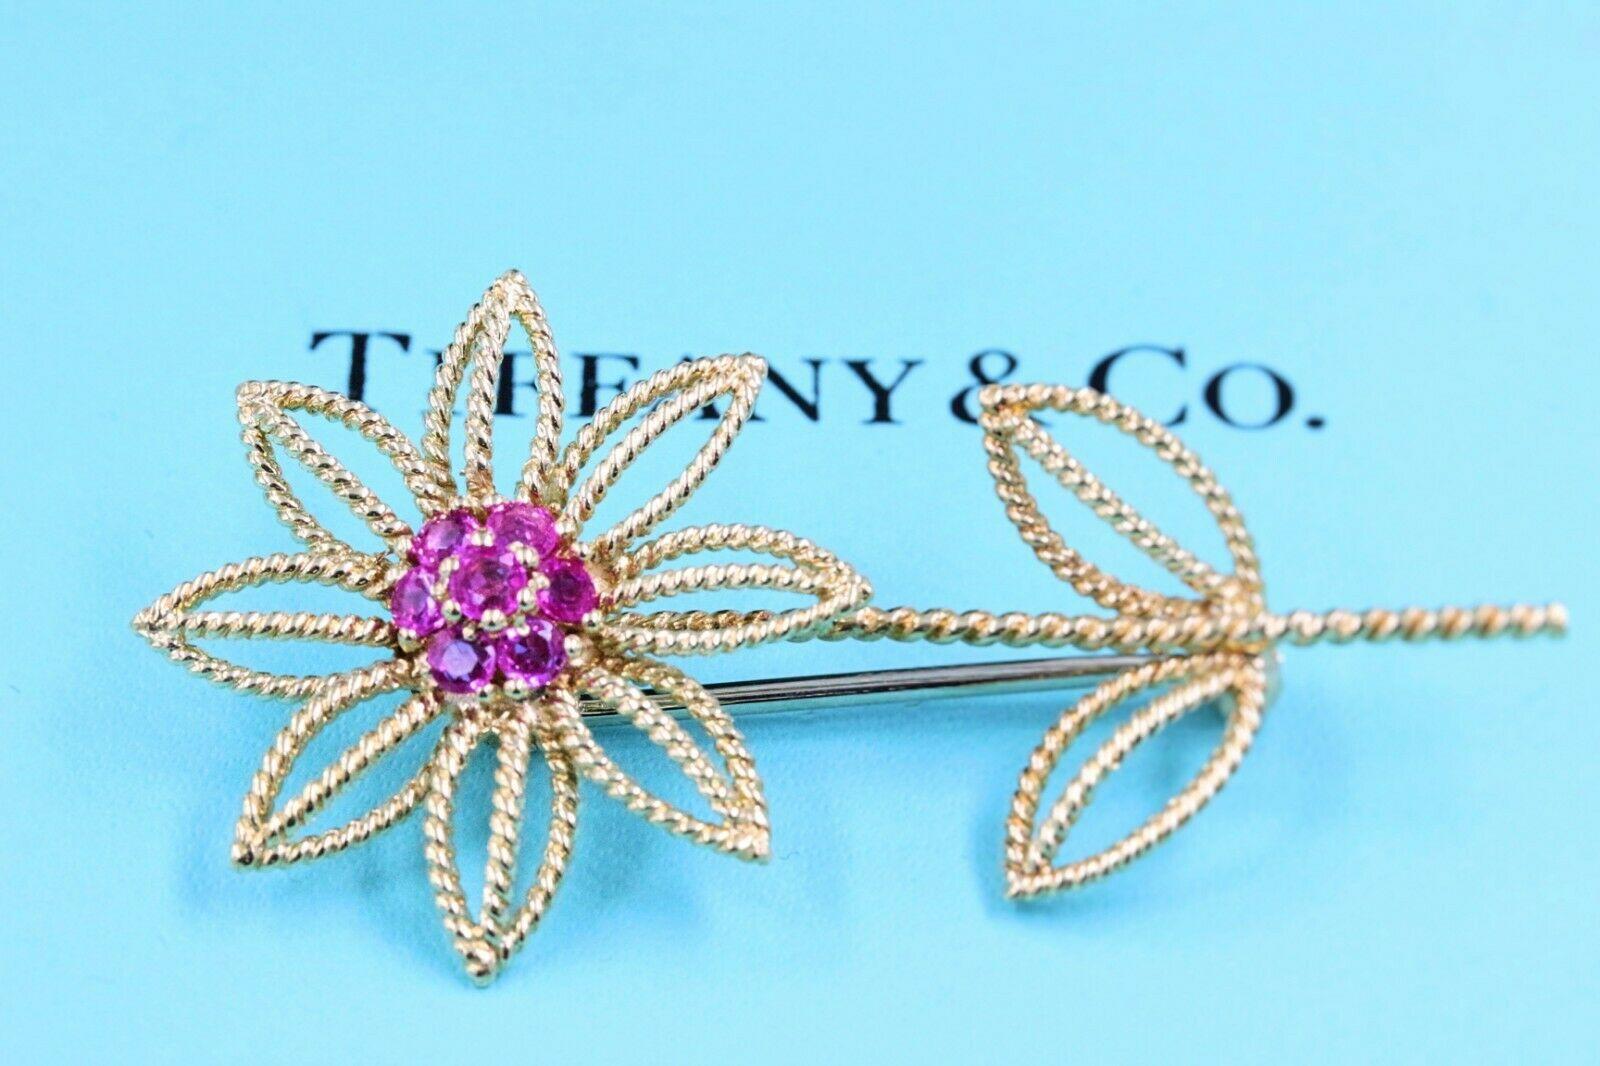 Authentic Vintage 1960s Tiffany & Co 18 Karat Gold Flower Brooch with Rubies 6